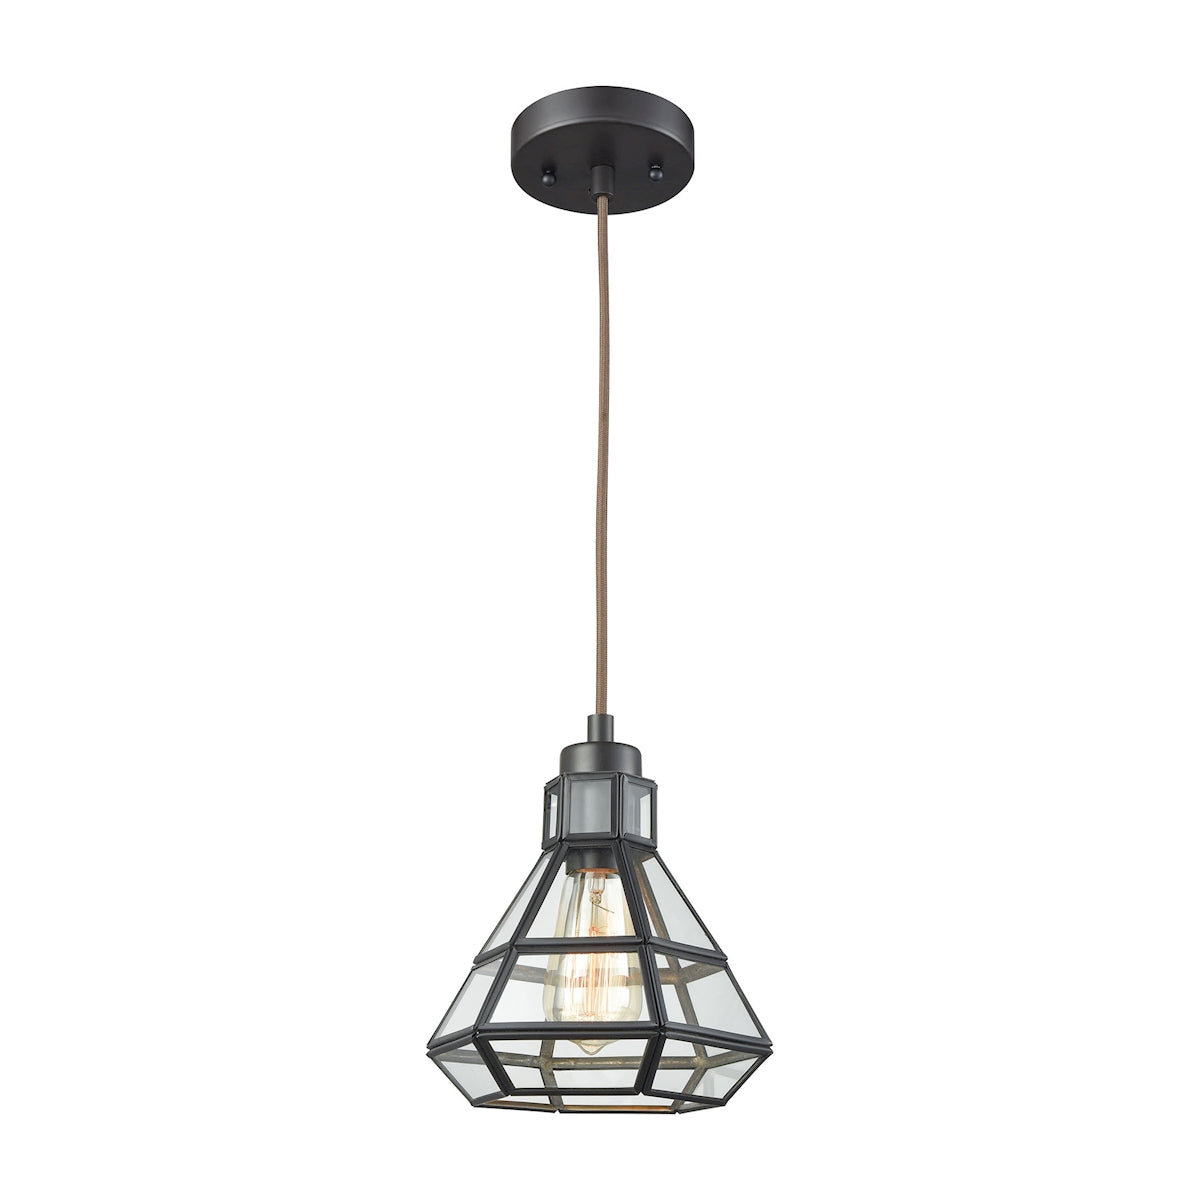 ELK Lighting 57126/1 Window Pane 1-Light Mini Pendant in Oil Rubbed Bronze with Clear Glass